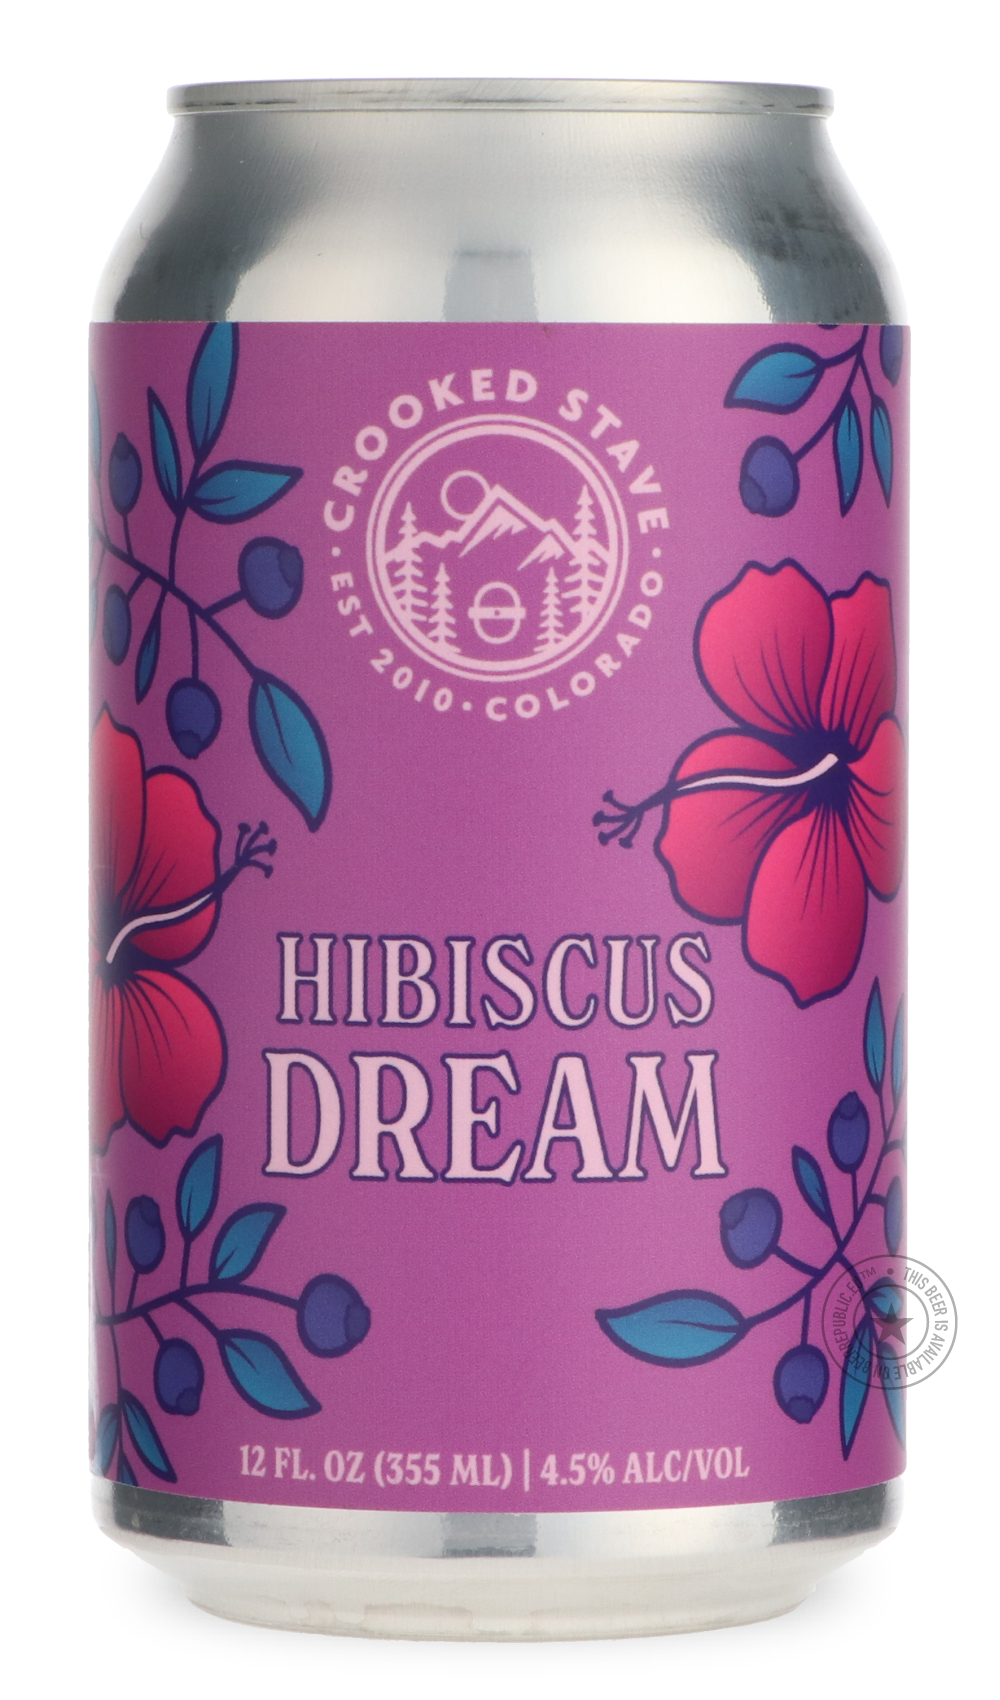 -Crooked Stave- Hibiscus Dream-Sour / Wild & Fruity- Only @ Beer Republic - The best online beer store for American & Canadian craft beer - Buy beer online from the USA and Canada - Bier online kopen - Amerikaans bier kopen - Craft beer store - Craft beer kopen - Amerikanisch bier kaufen - Bier online kaufen - Acheter biere online - IPA - Stout - Porter - New England IPA - Hazy IPA - Imperial Stout - Barrel Aged - Barrel Aged Imperial Stout - Brown - Dark beer - Blond - Blonde - Pilsner - Lager - Wheat - We